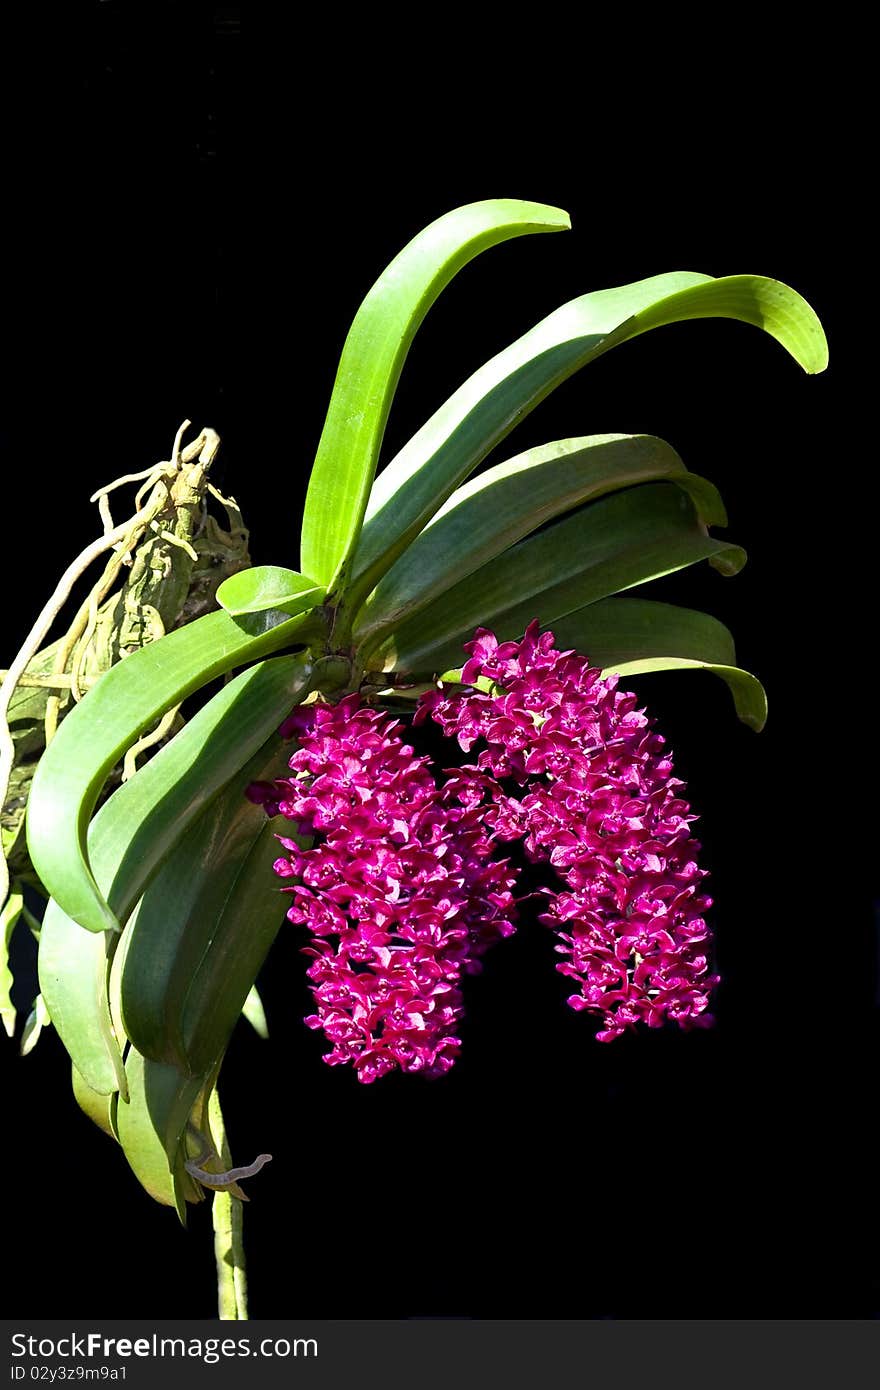 Wild orchid flower bouquet with flowers and leaf shapes that look strange.